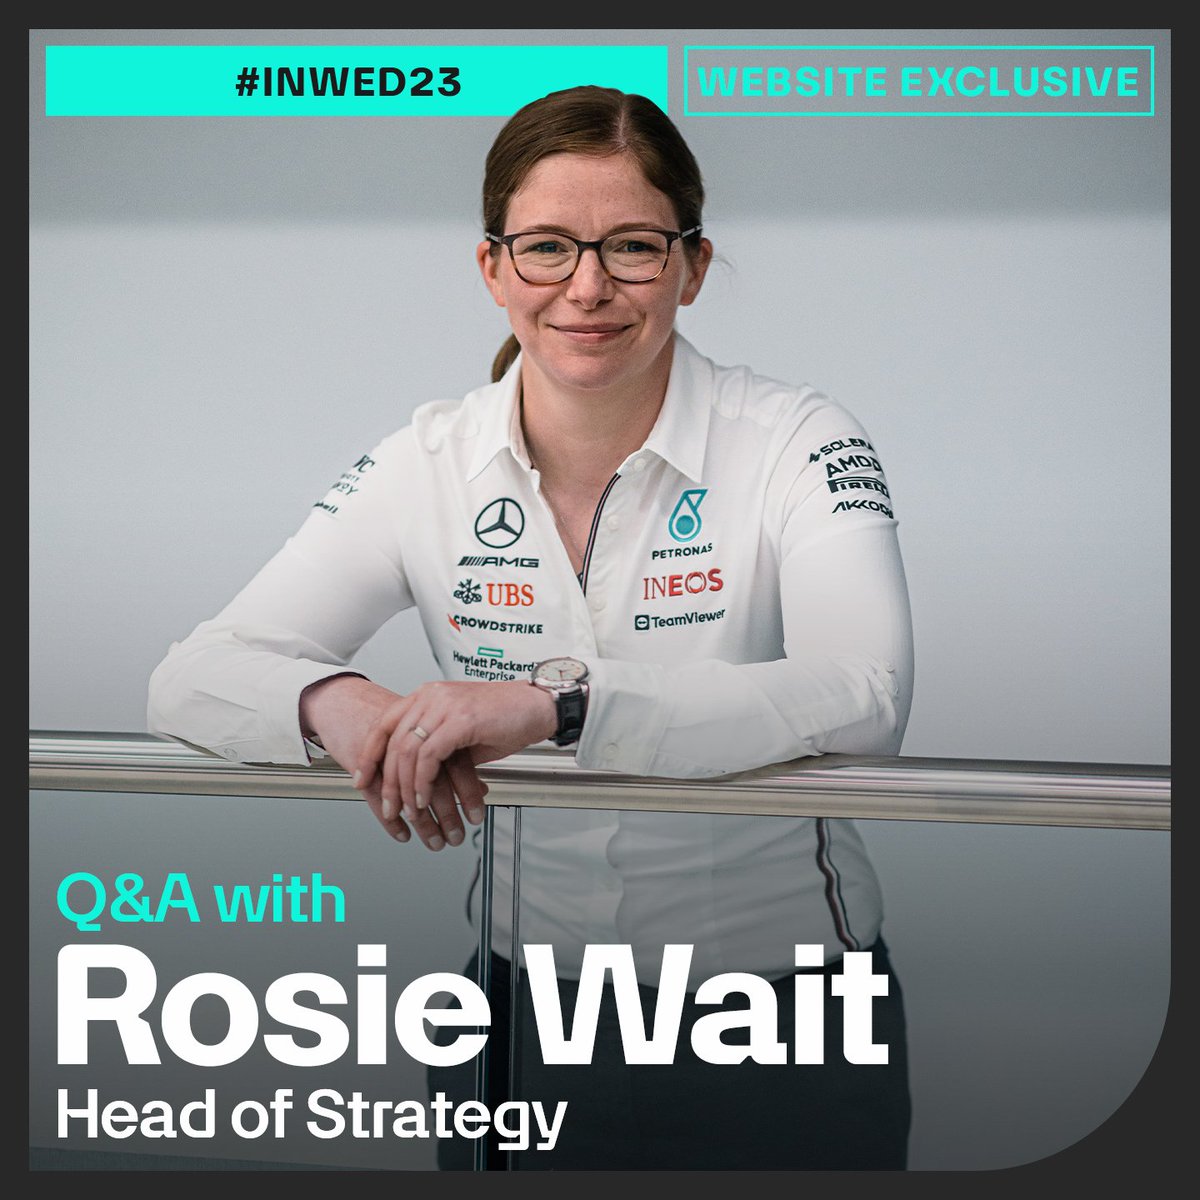 To mark #INWED23 this Friday, we're putting your questions to Rosie Wait - our Head of Strategy - in an exclusive website Q&A. 👏

Share your questions below and we'll put as many of them to Rosie as we can. Stay tuned on our website to see her answers. 👀